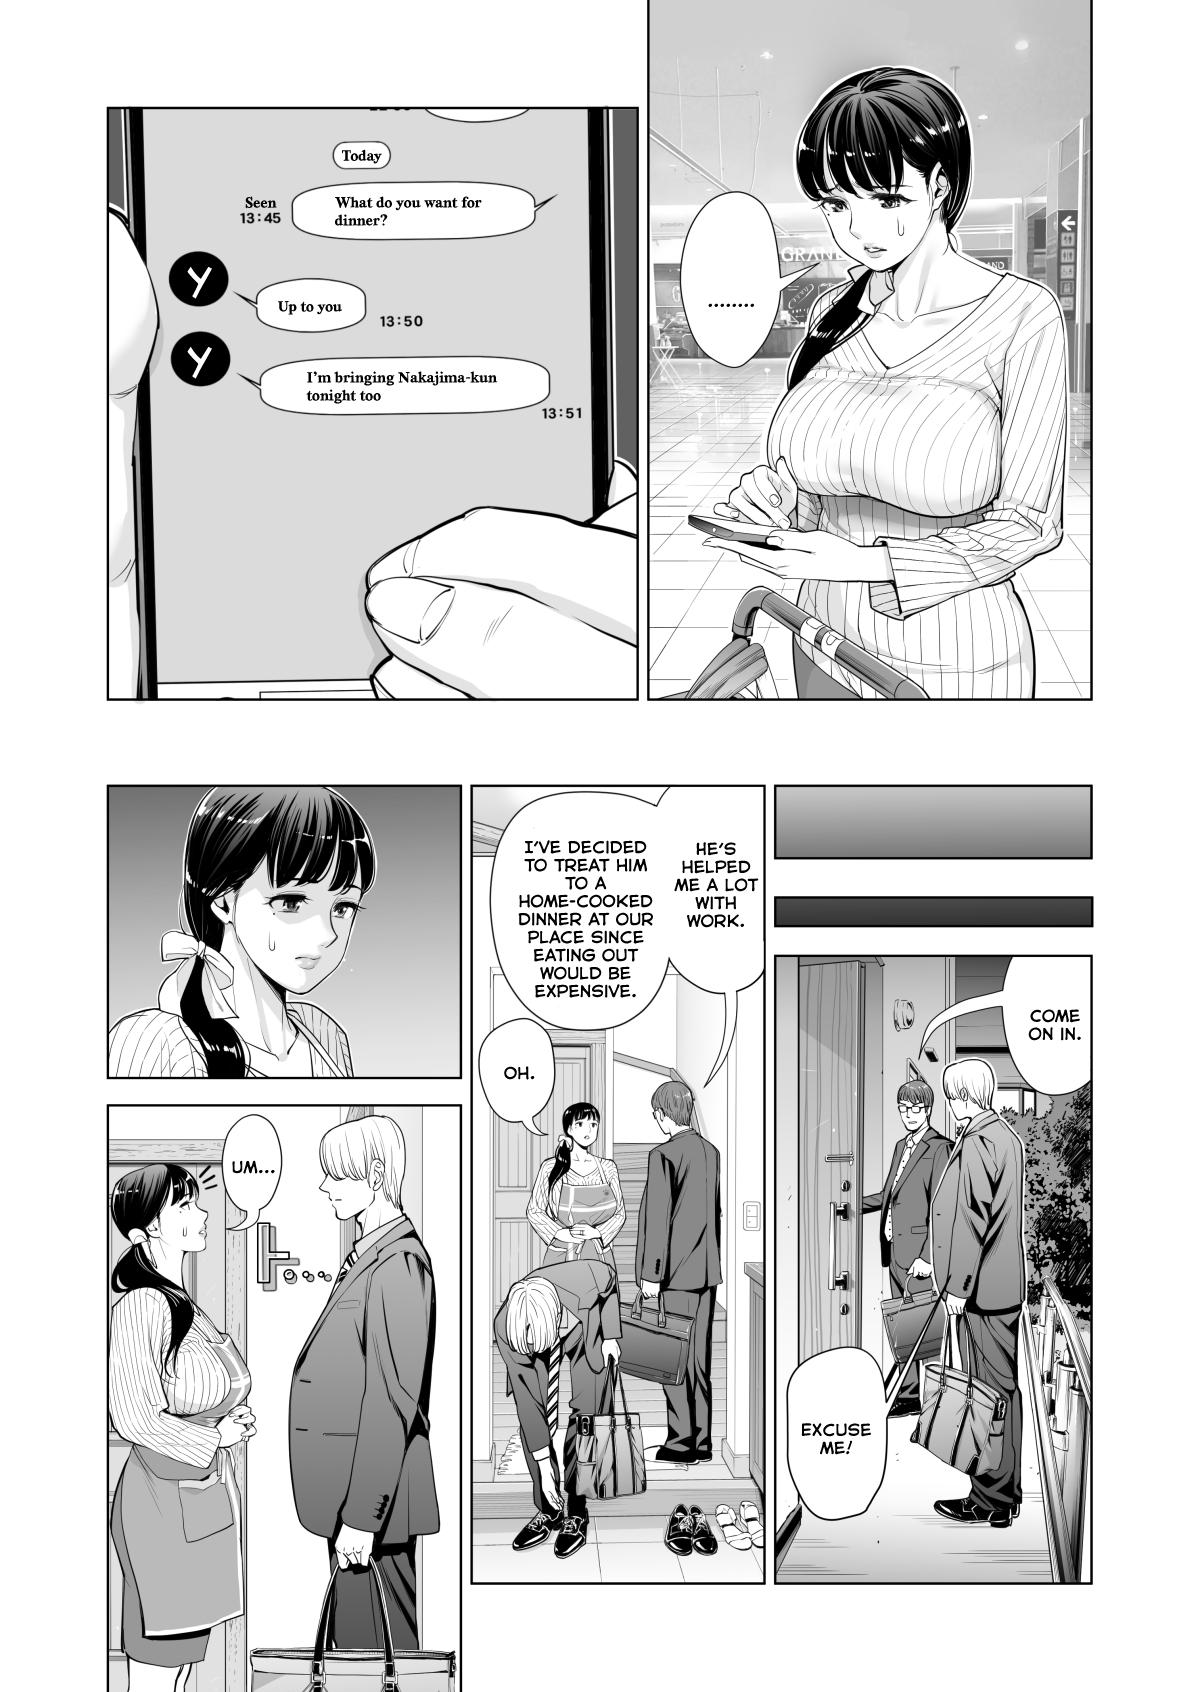 [HGT Lab (Tsusauto)] Tsukiyo no Midare Zake (Zenpen) Moonlit Intoxication ~ A Housewife Stolen by a Coworker Besides her Blackout Drunk Husband ~ Chapter 1 [English] 20